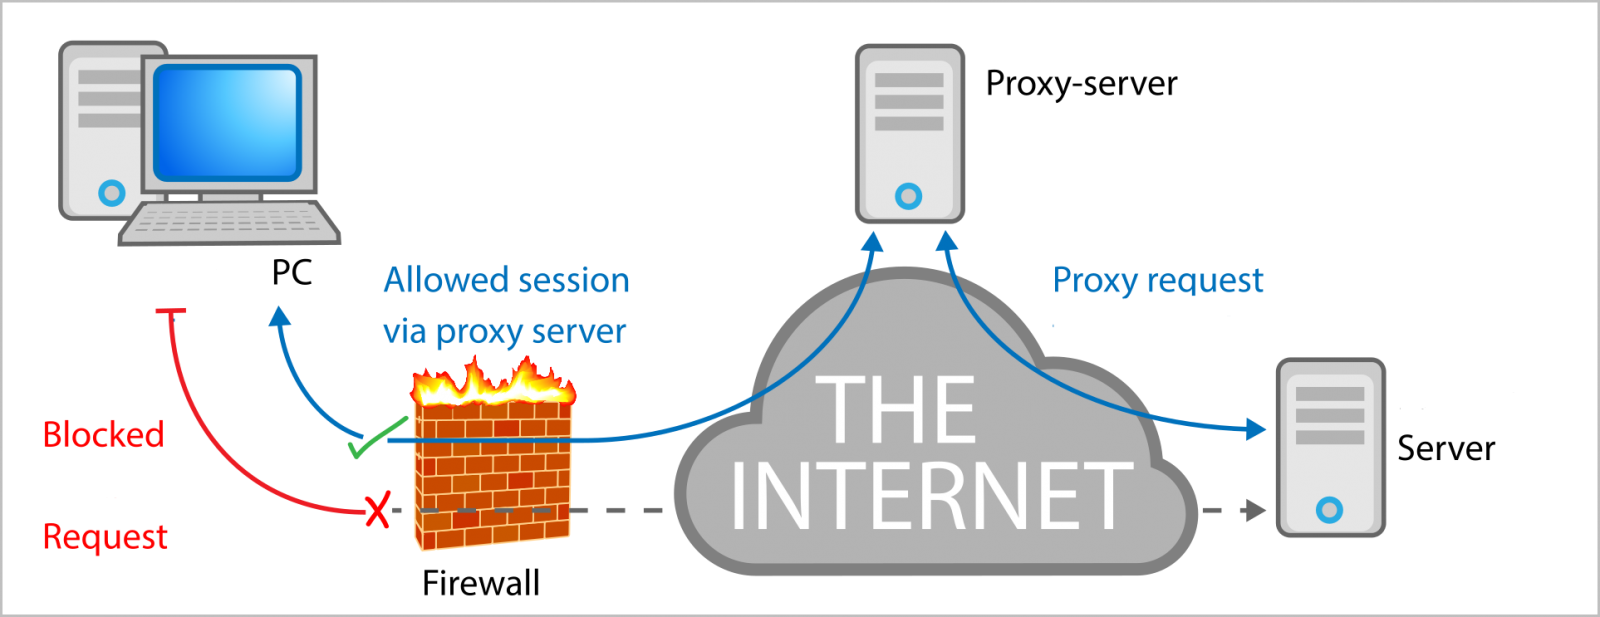 The general function of proxy servers